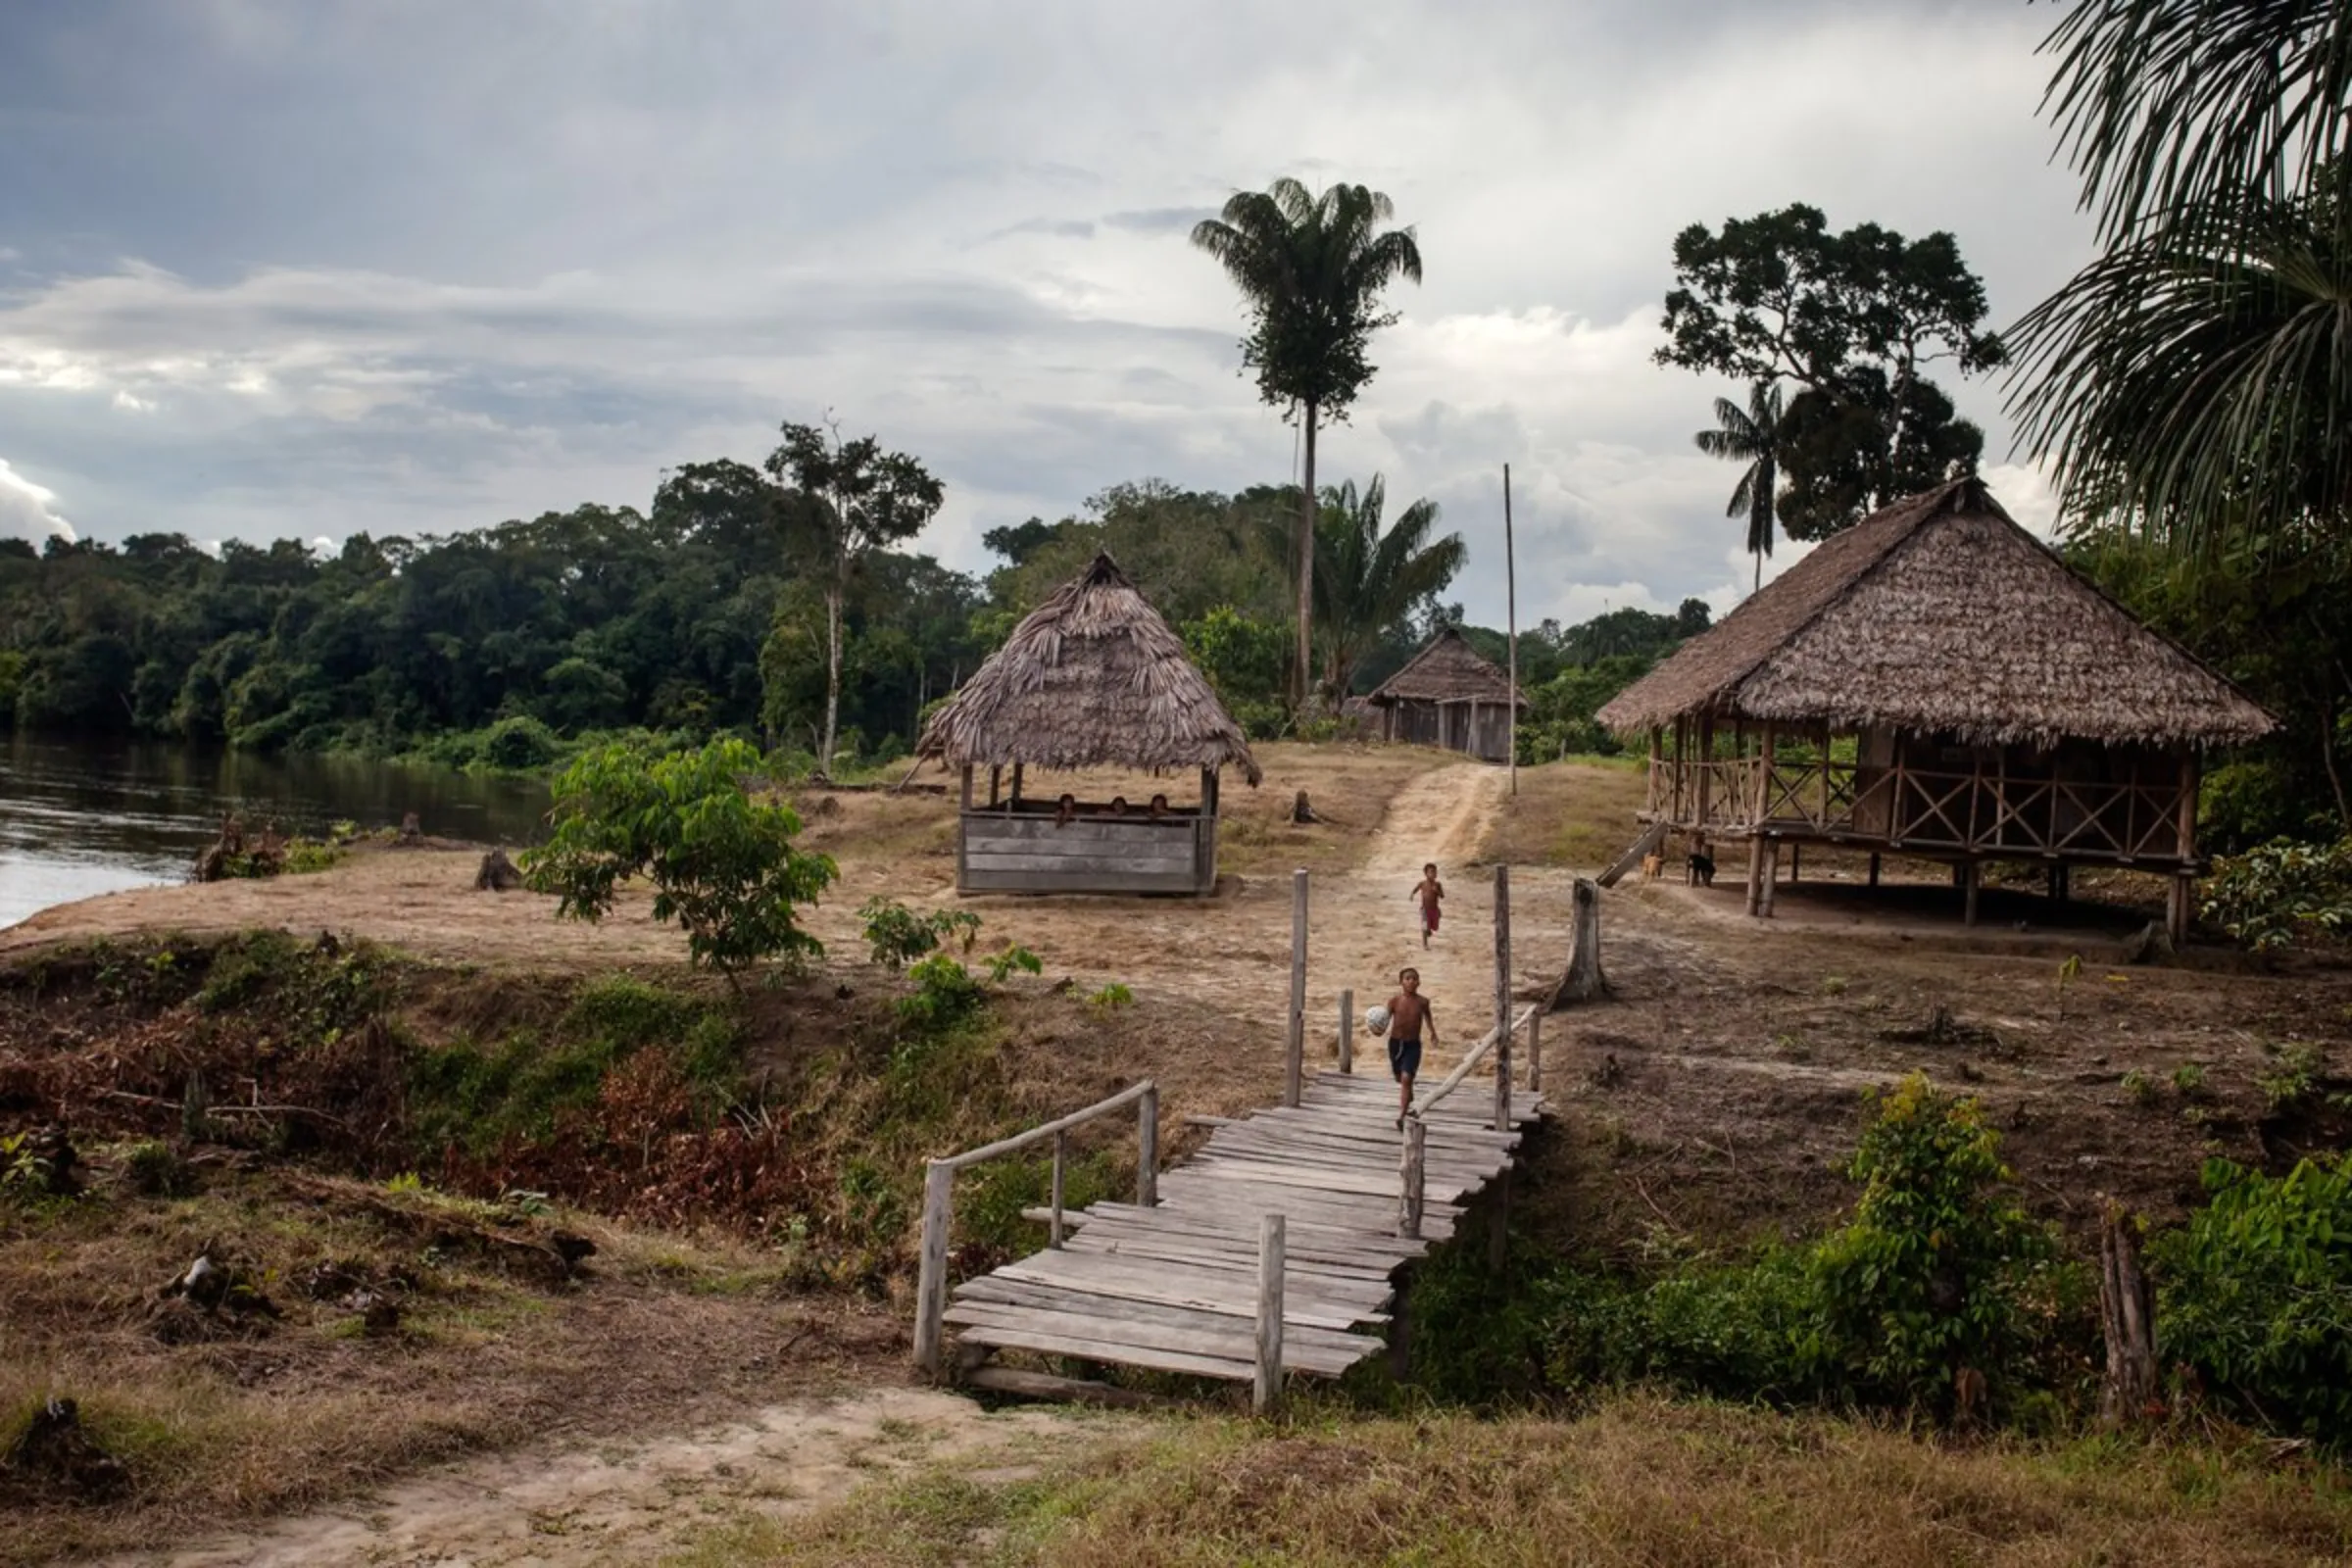 Indigenous children play at the Puerto Libre riverside community near thatched classrooms where native languages and cultural practices are taught, December 19, 2021